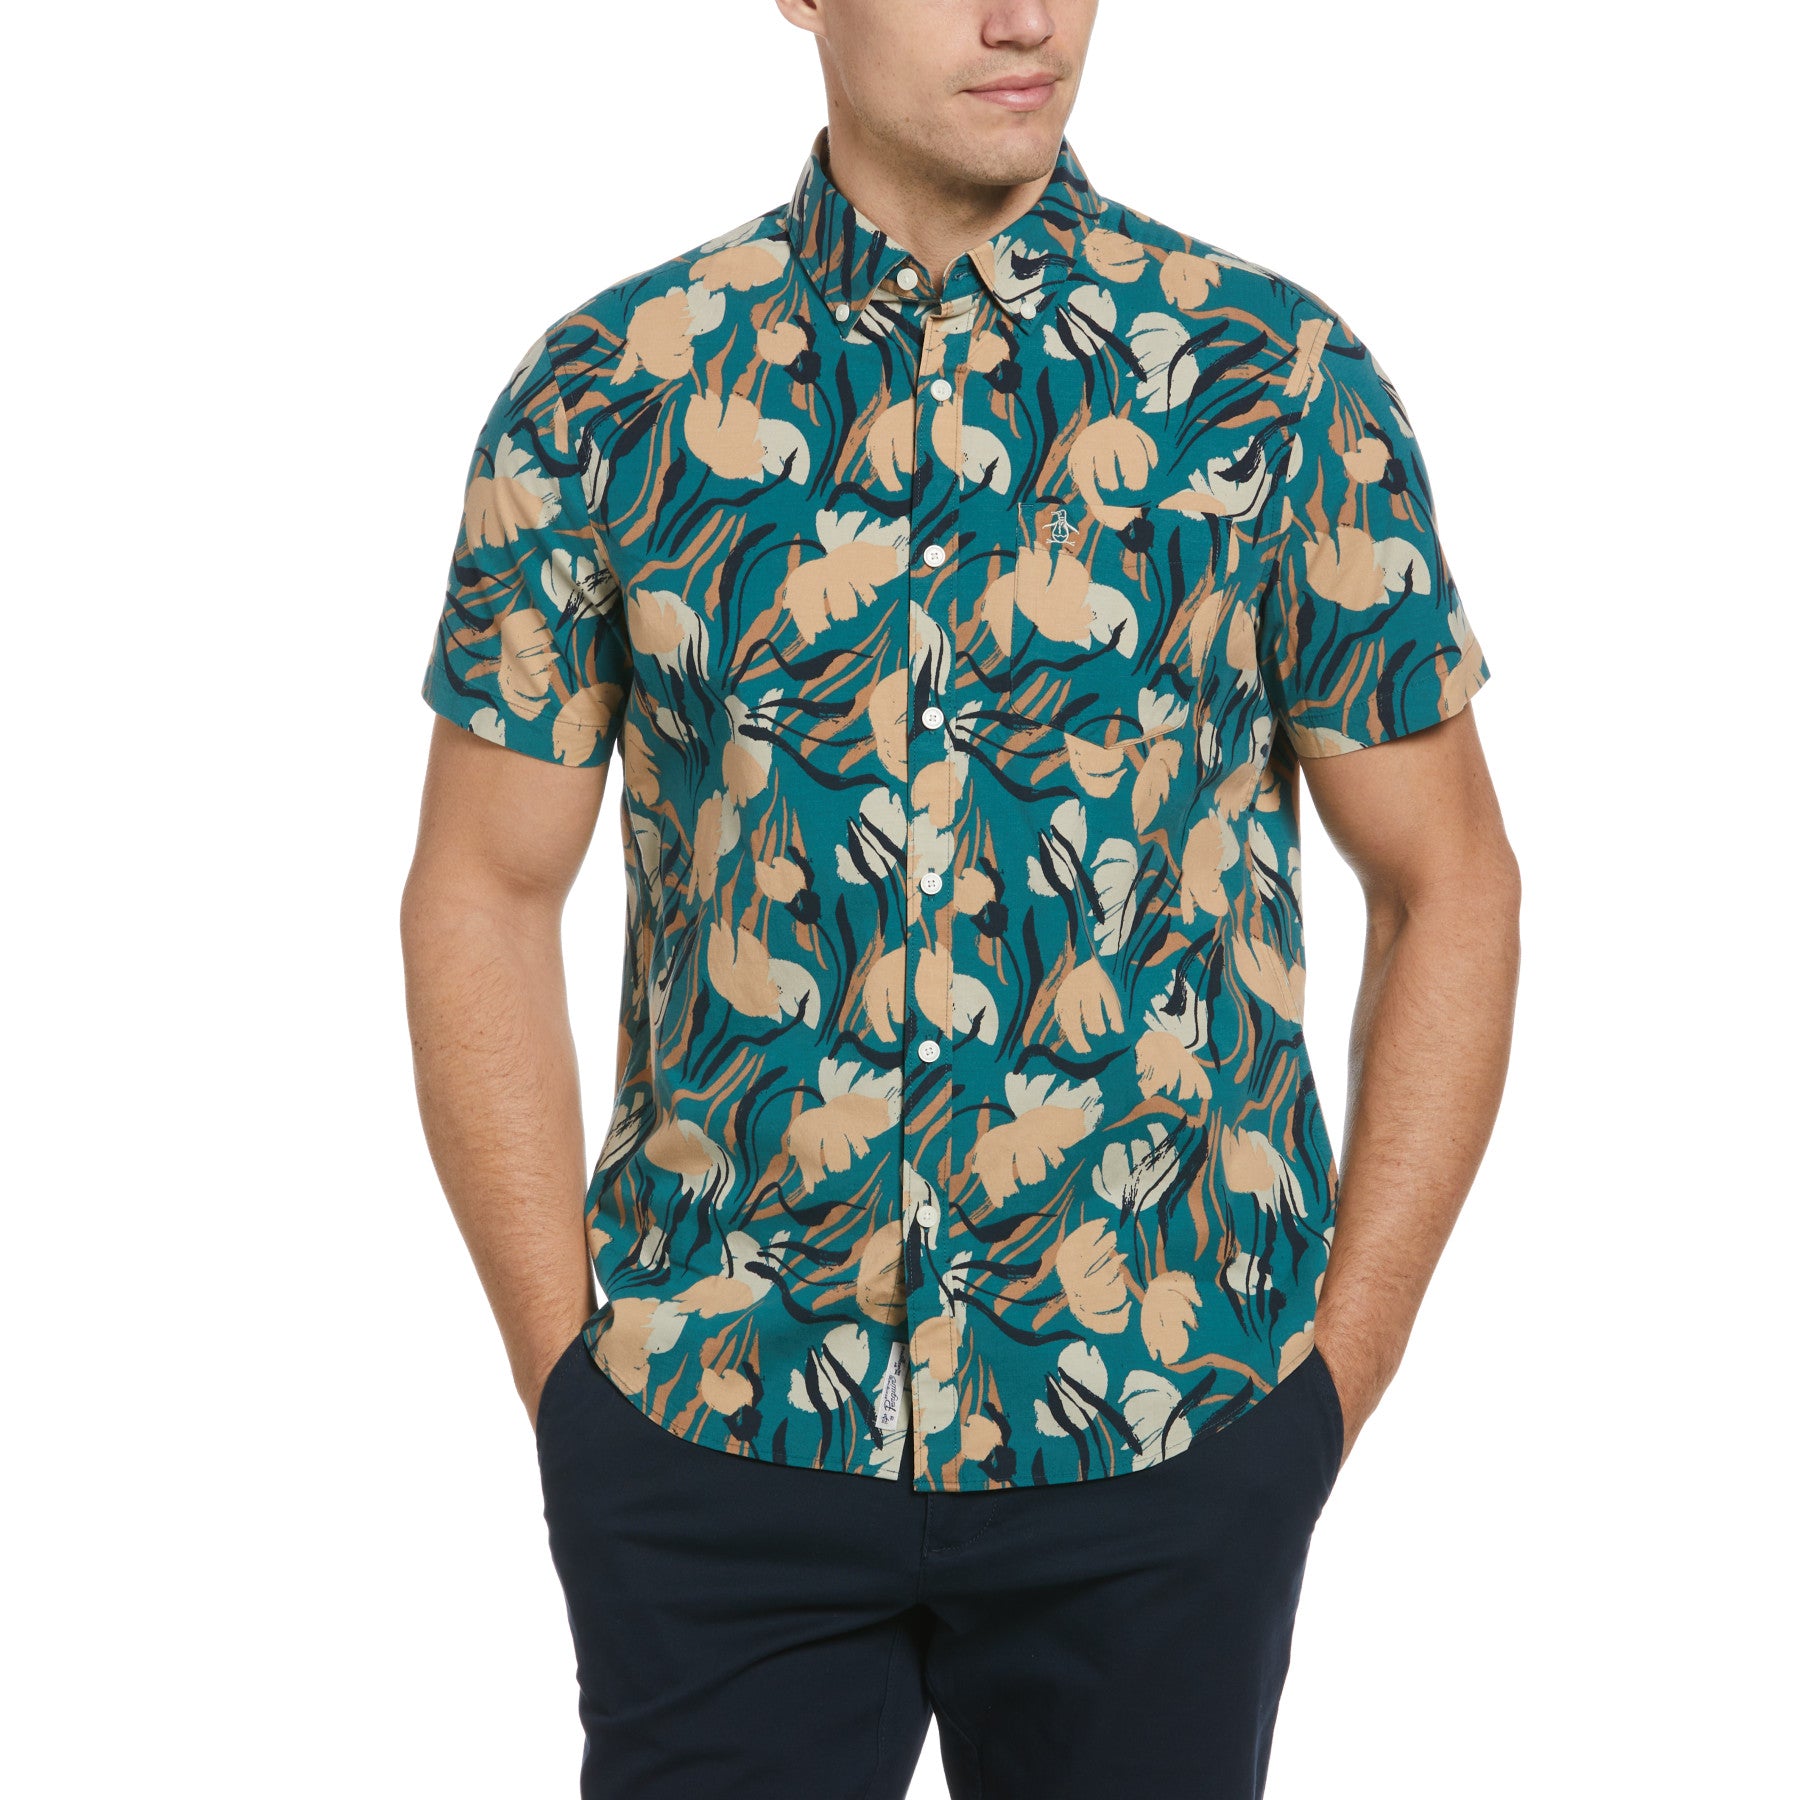 View Ecovero Blend Painted Floral Print Shirt In Pacific information